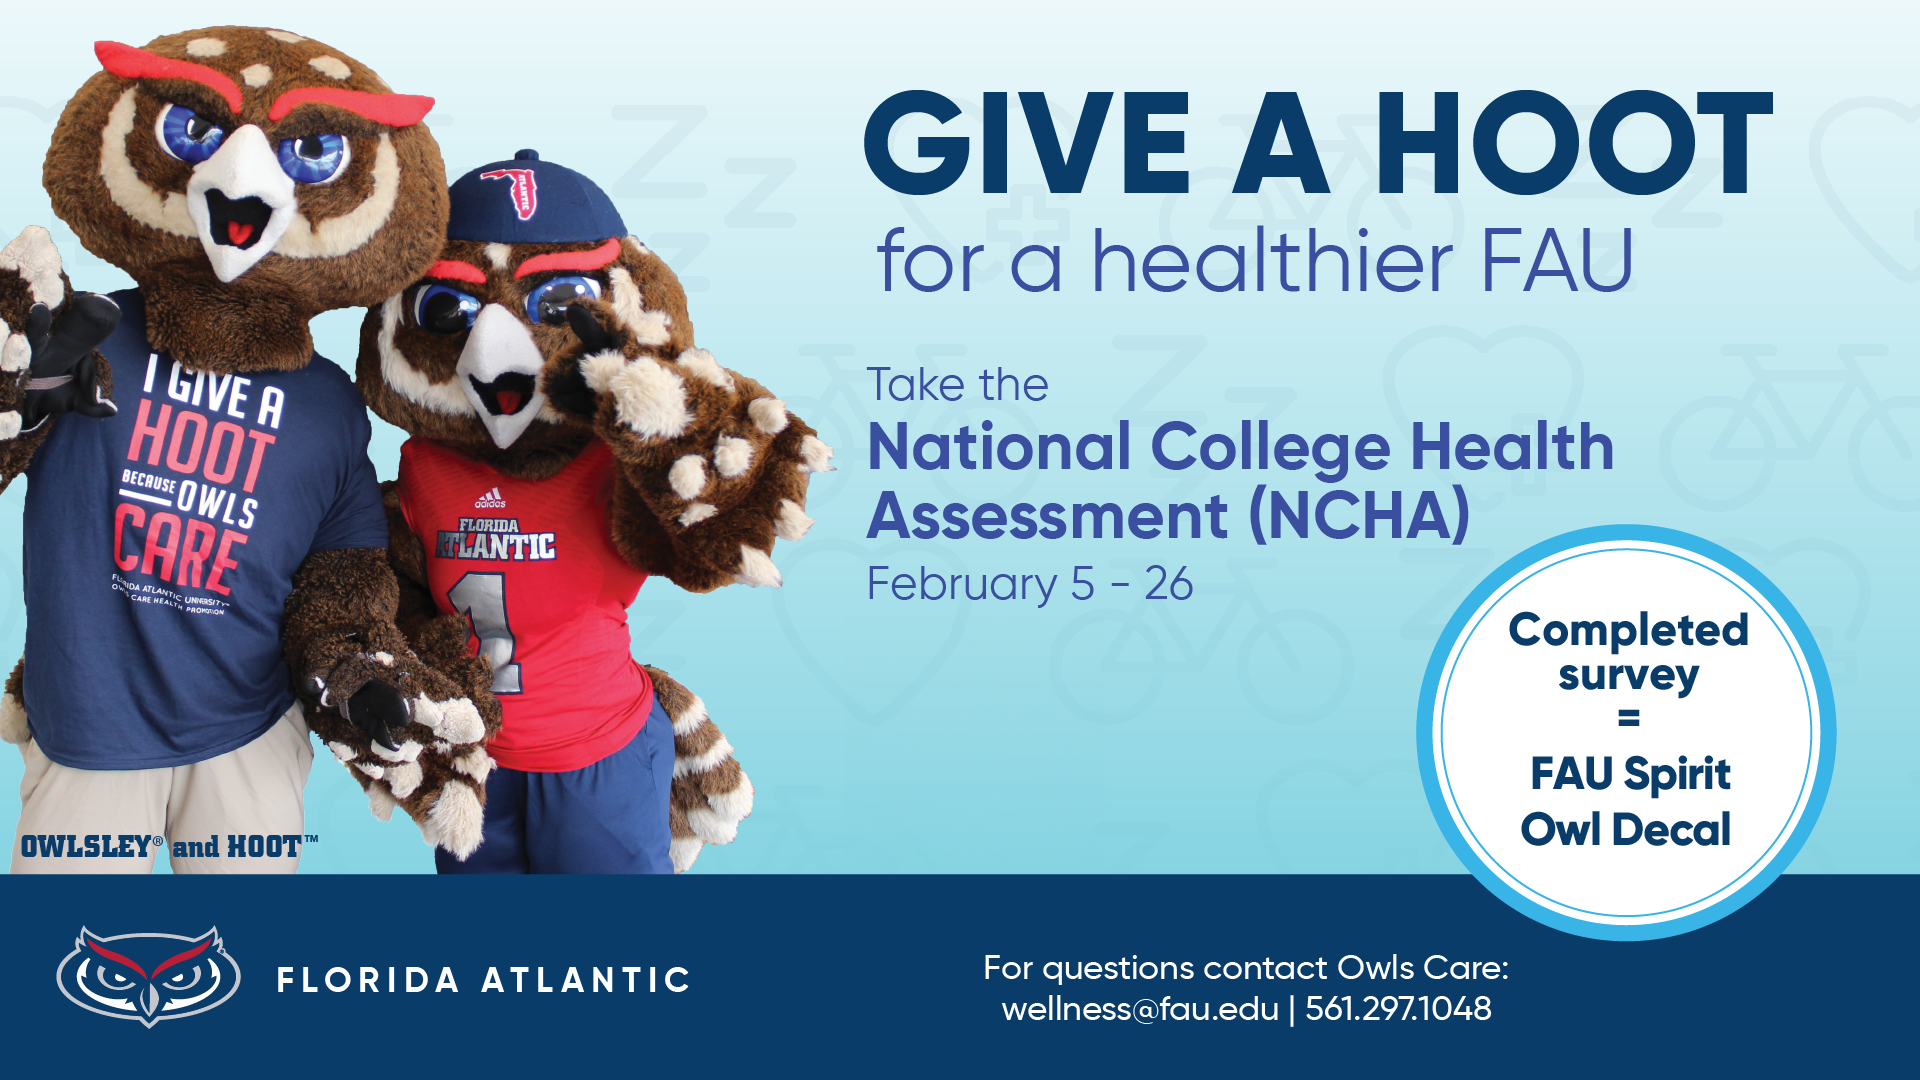 Give a Hoot for a Healthier FAU - Take the National College Health Assessment!